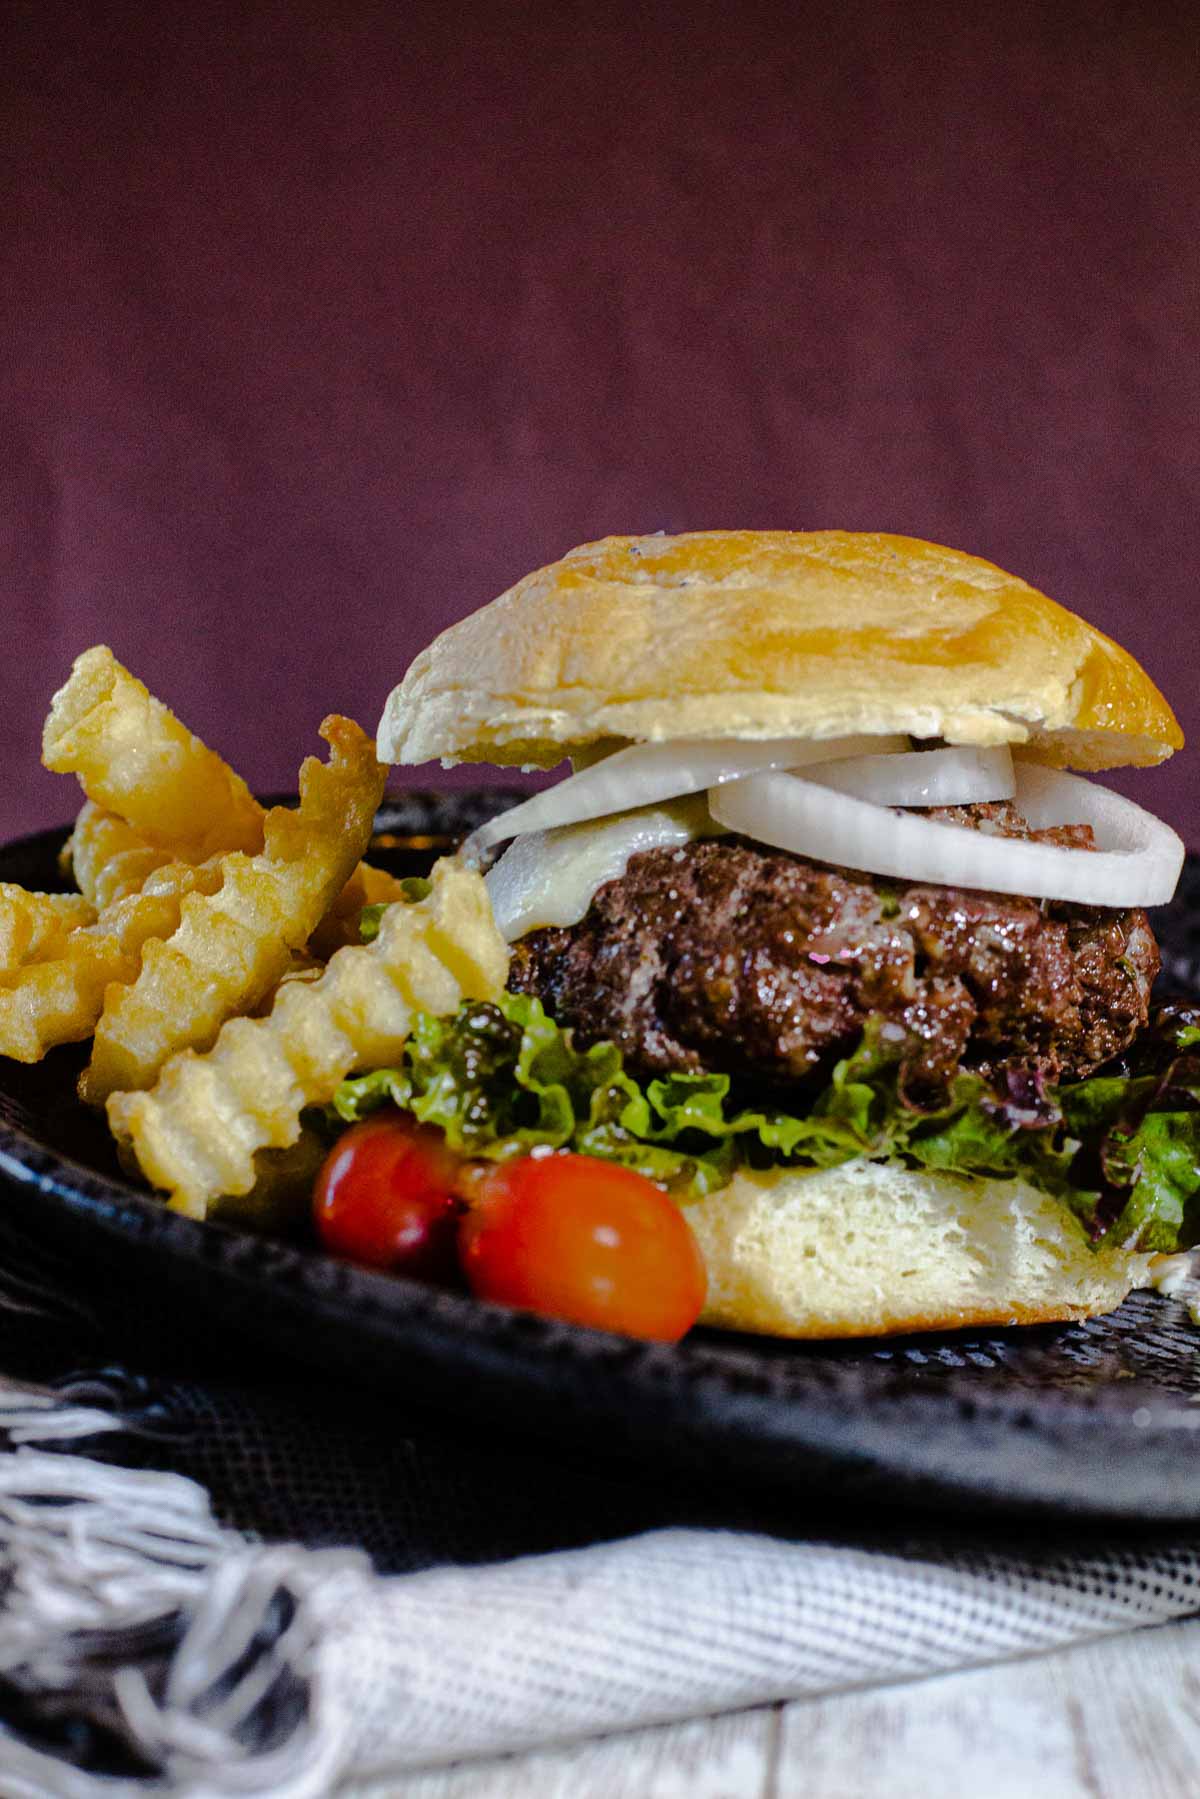 Blue cheese burger recipe topped with rings of onion and tomato with crinkle fries.